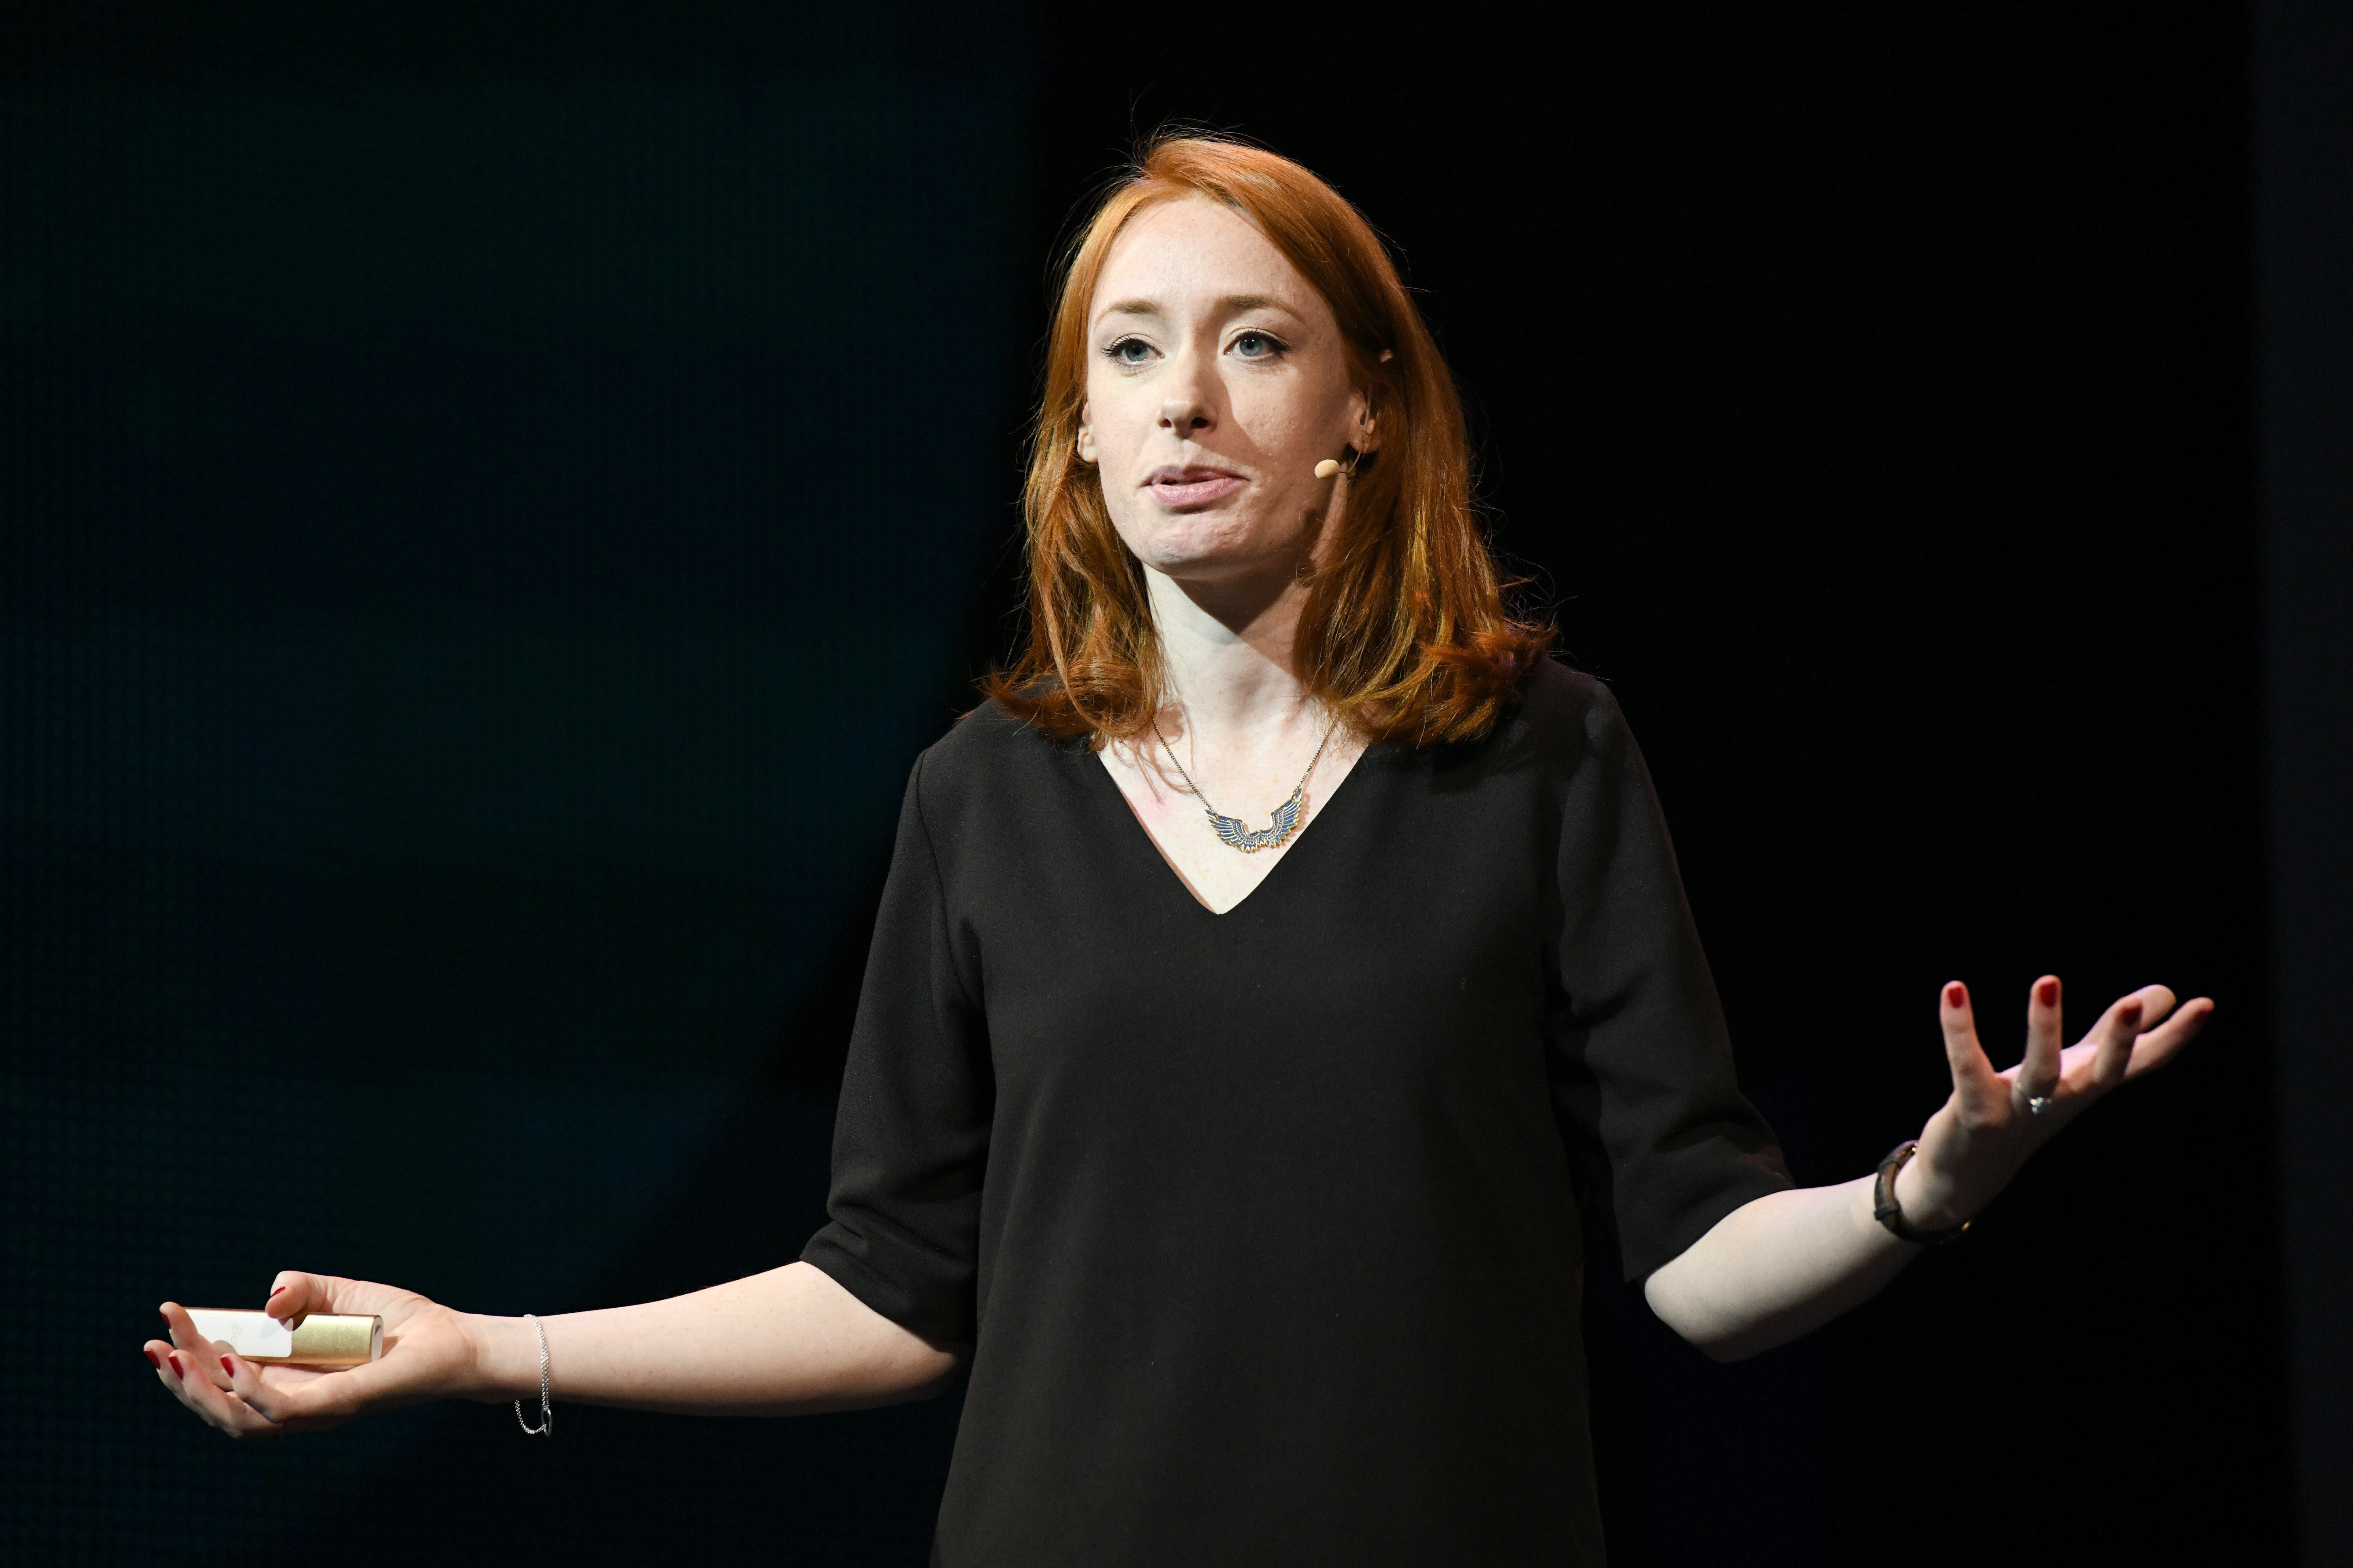 Dr Hannah Fry is a lecturer, podcaster, author and social media sensation